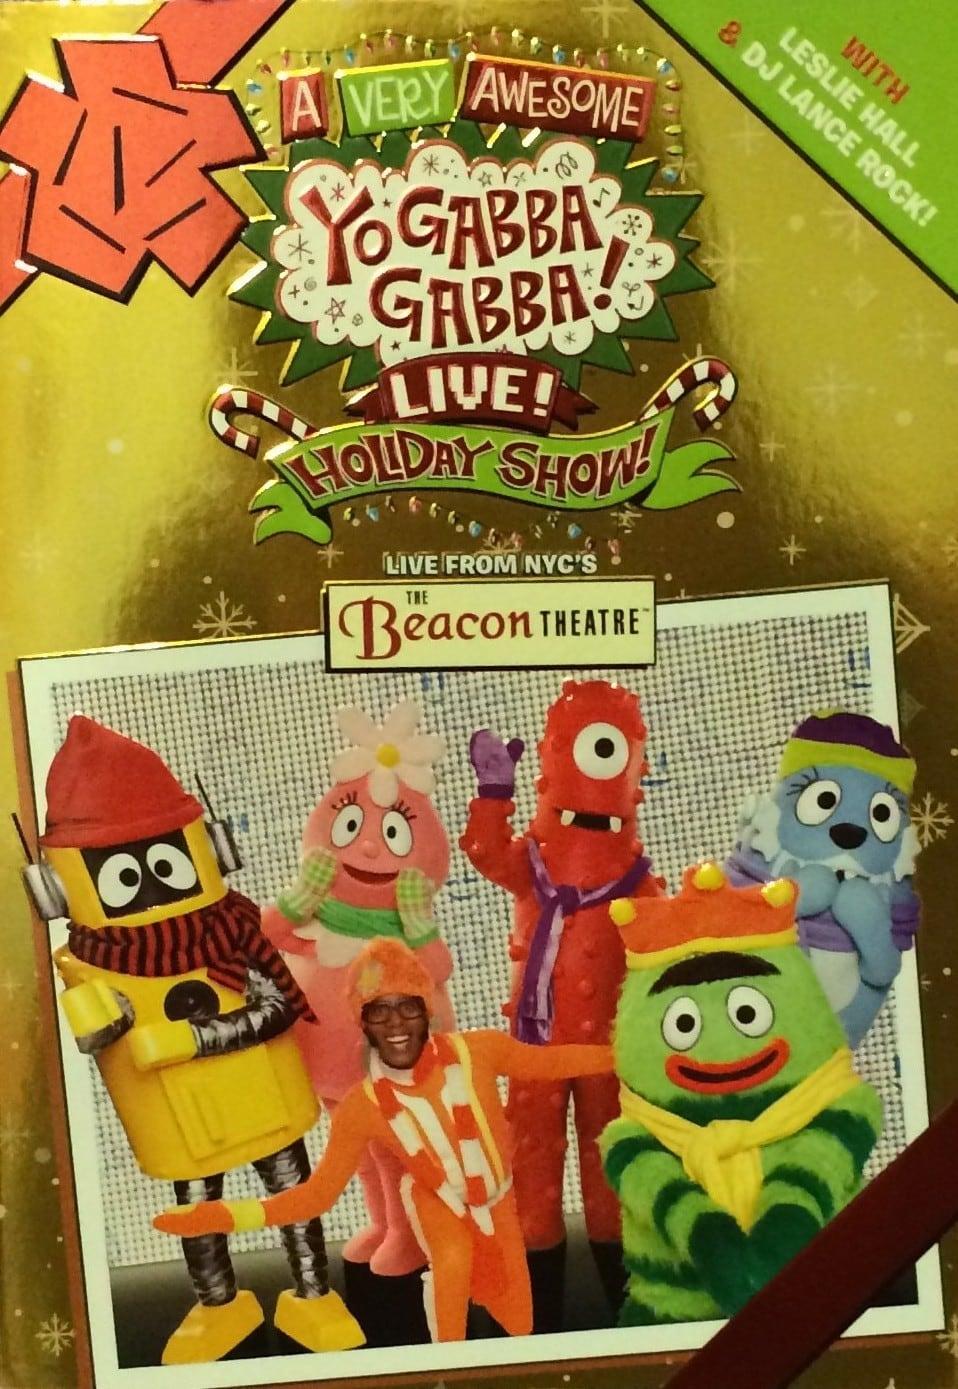 Yo Gabba Gabba: A Very Awesome Live Holiday Show! poster